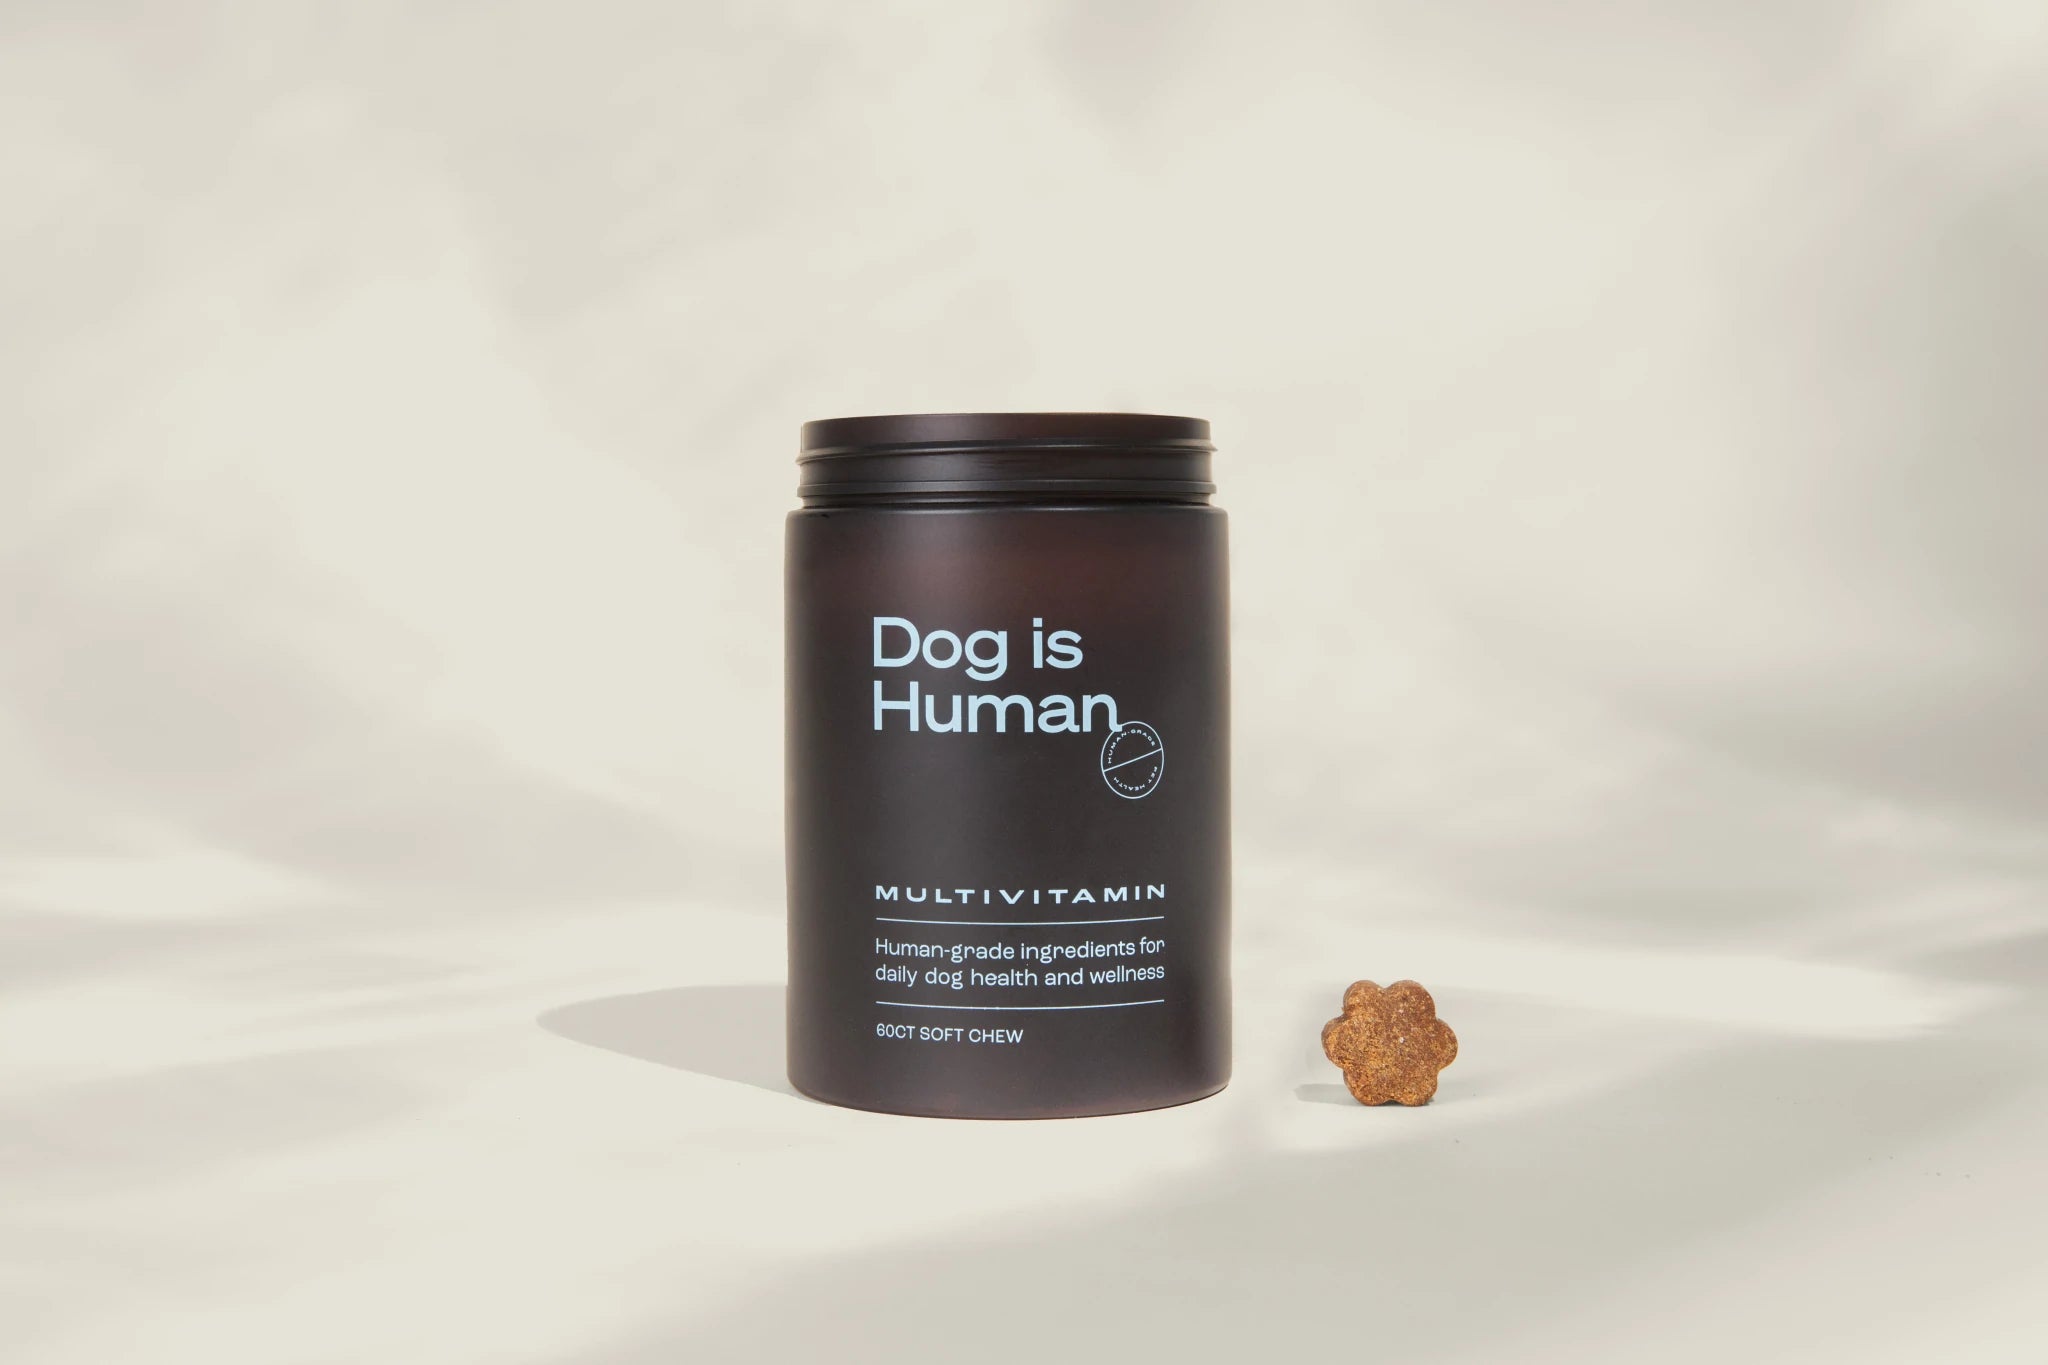 Front view of the Dog is Human multivitamin jar and one chew next to it against a beige, shadowy background.